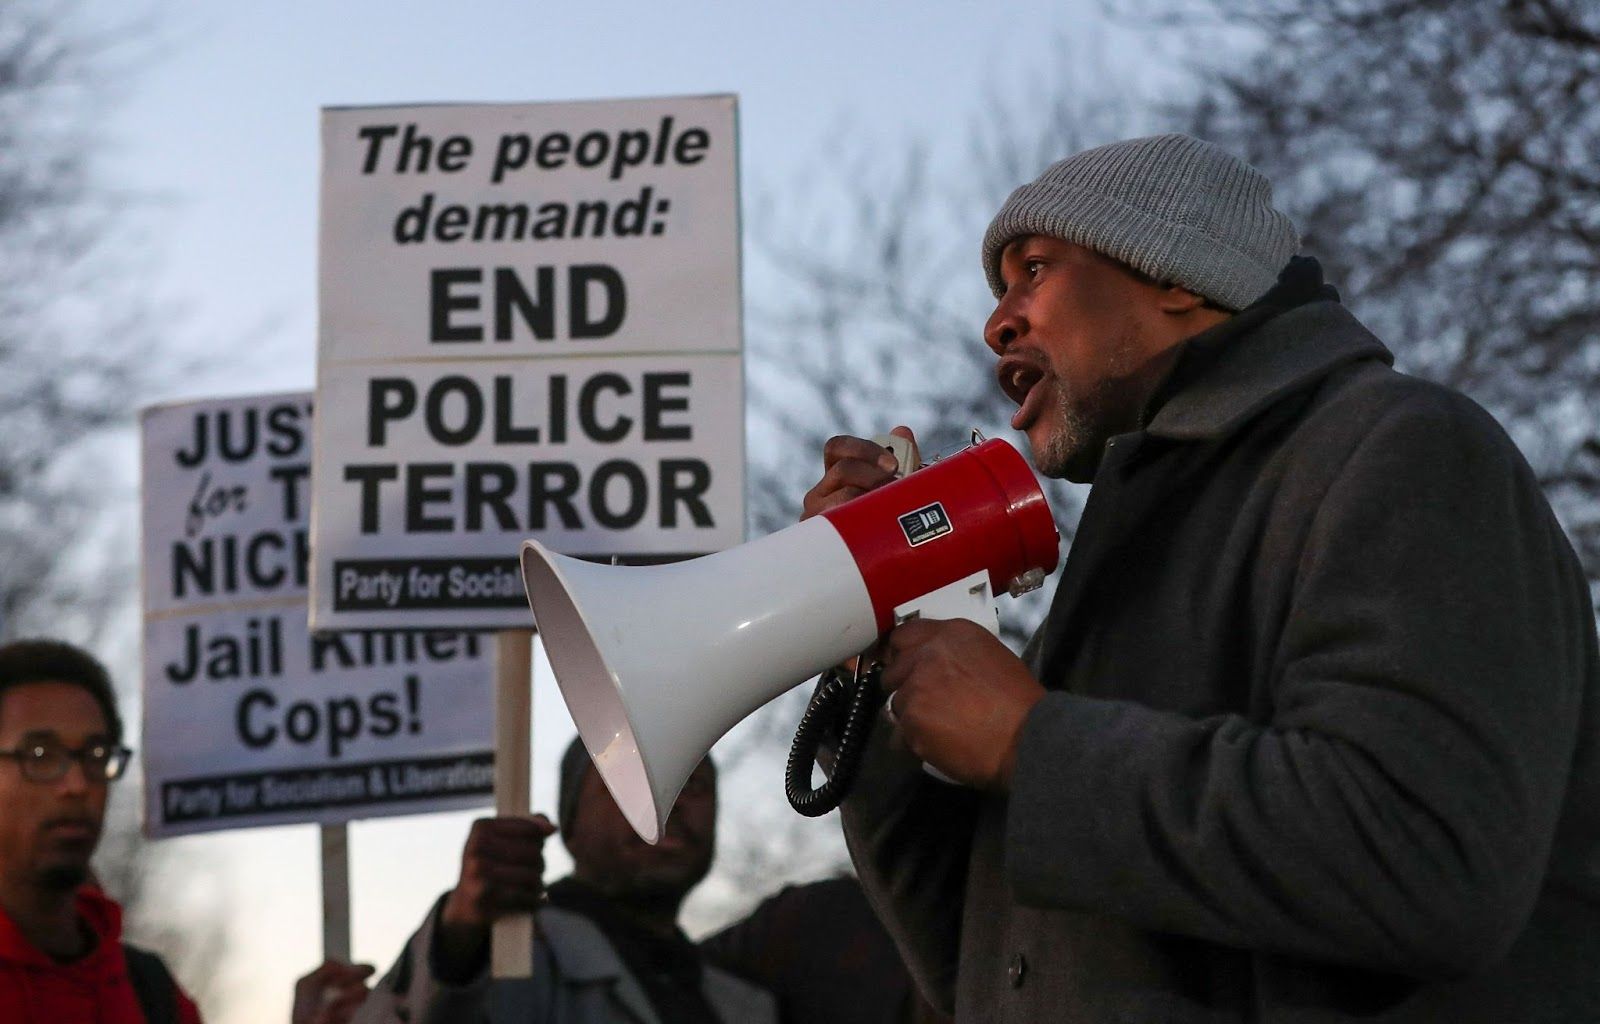 The community protests the death of Tyree Nichols. Image Source: Reuters